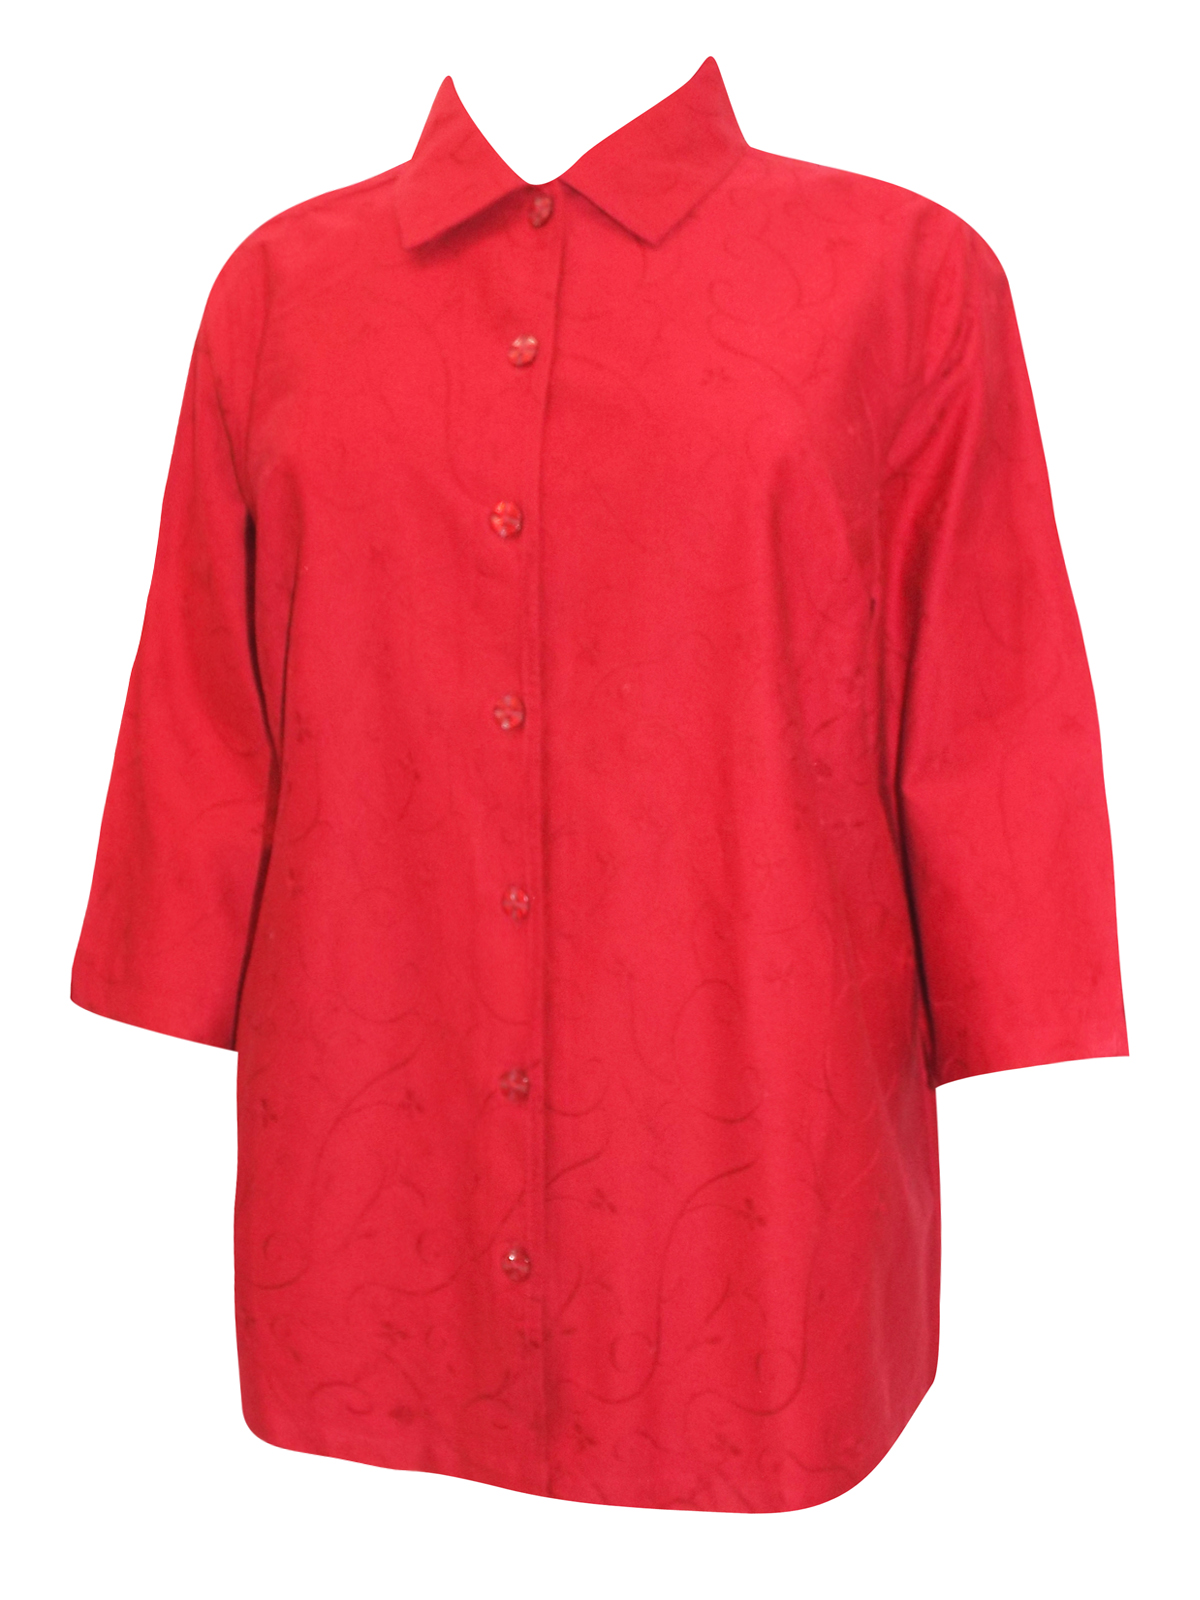 Plus Size Clothing - - Liz&Me RED Cotton Embroidered Half Sleeve Shirt ...